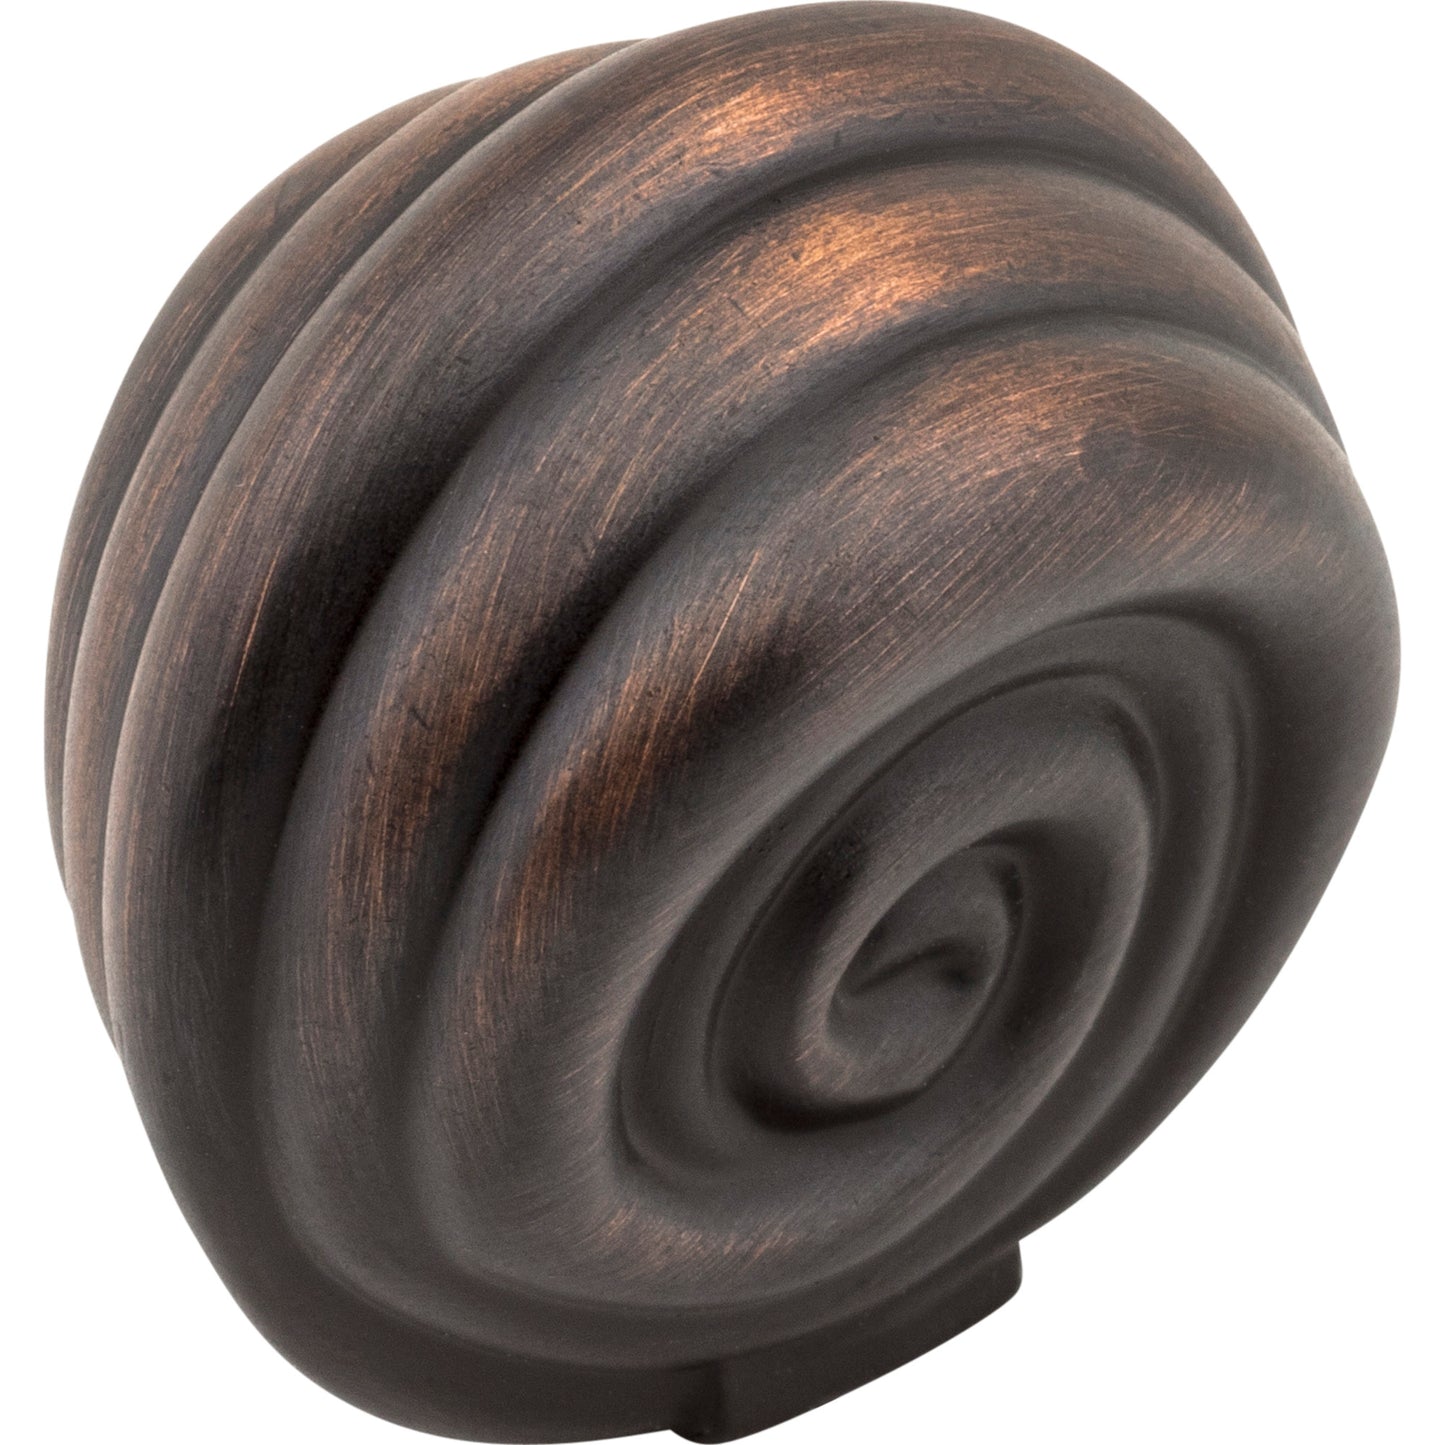 JEFFREY ALEXANDER 415DBAC 1-3/8" Overall Length Brushed Oil Rubbed Bronze Lille Cabinet Knob